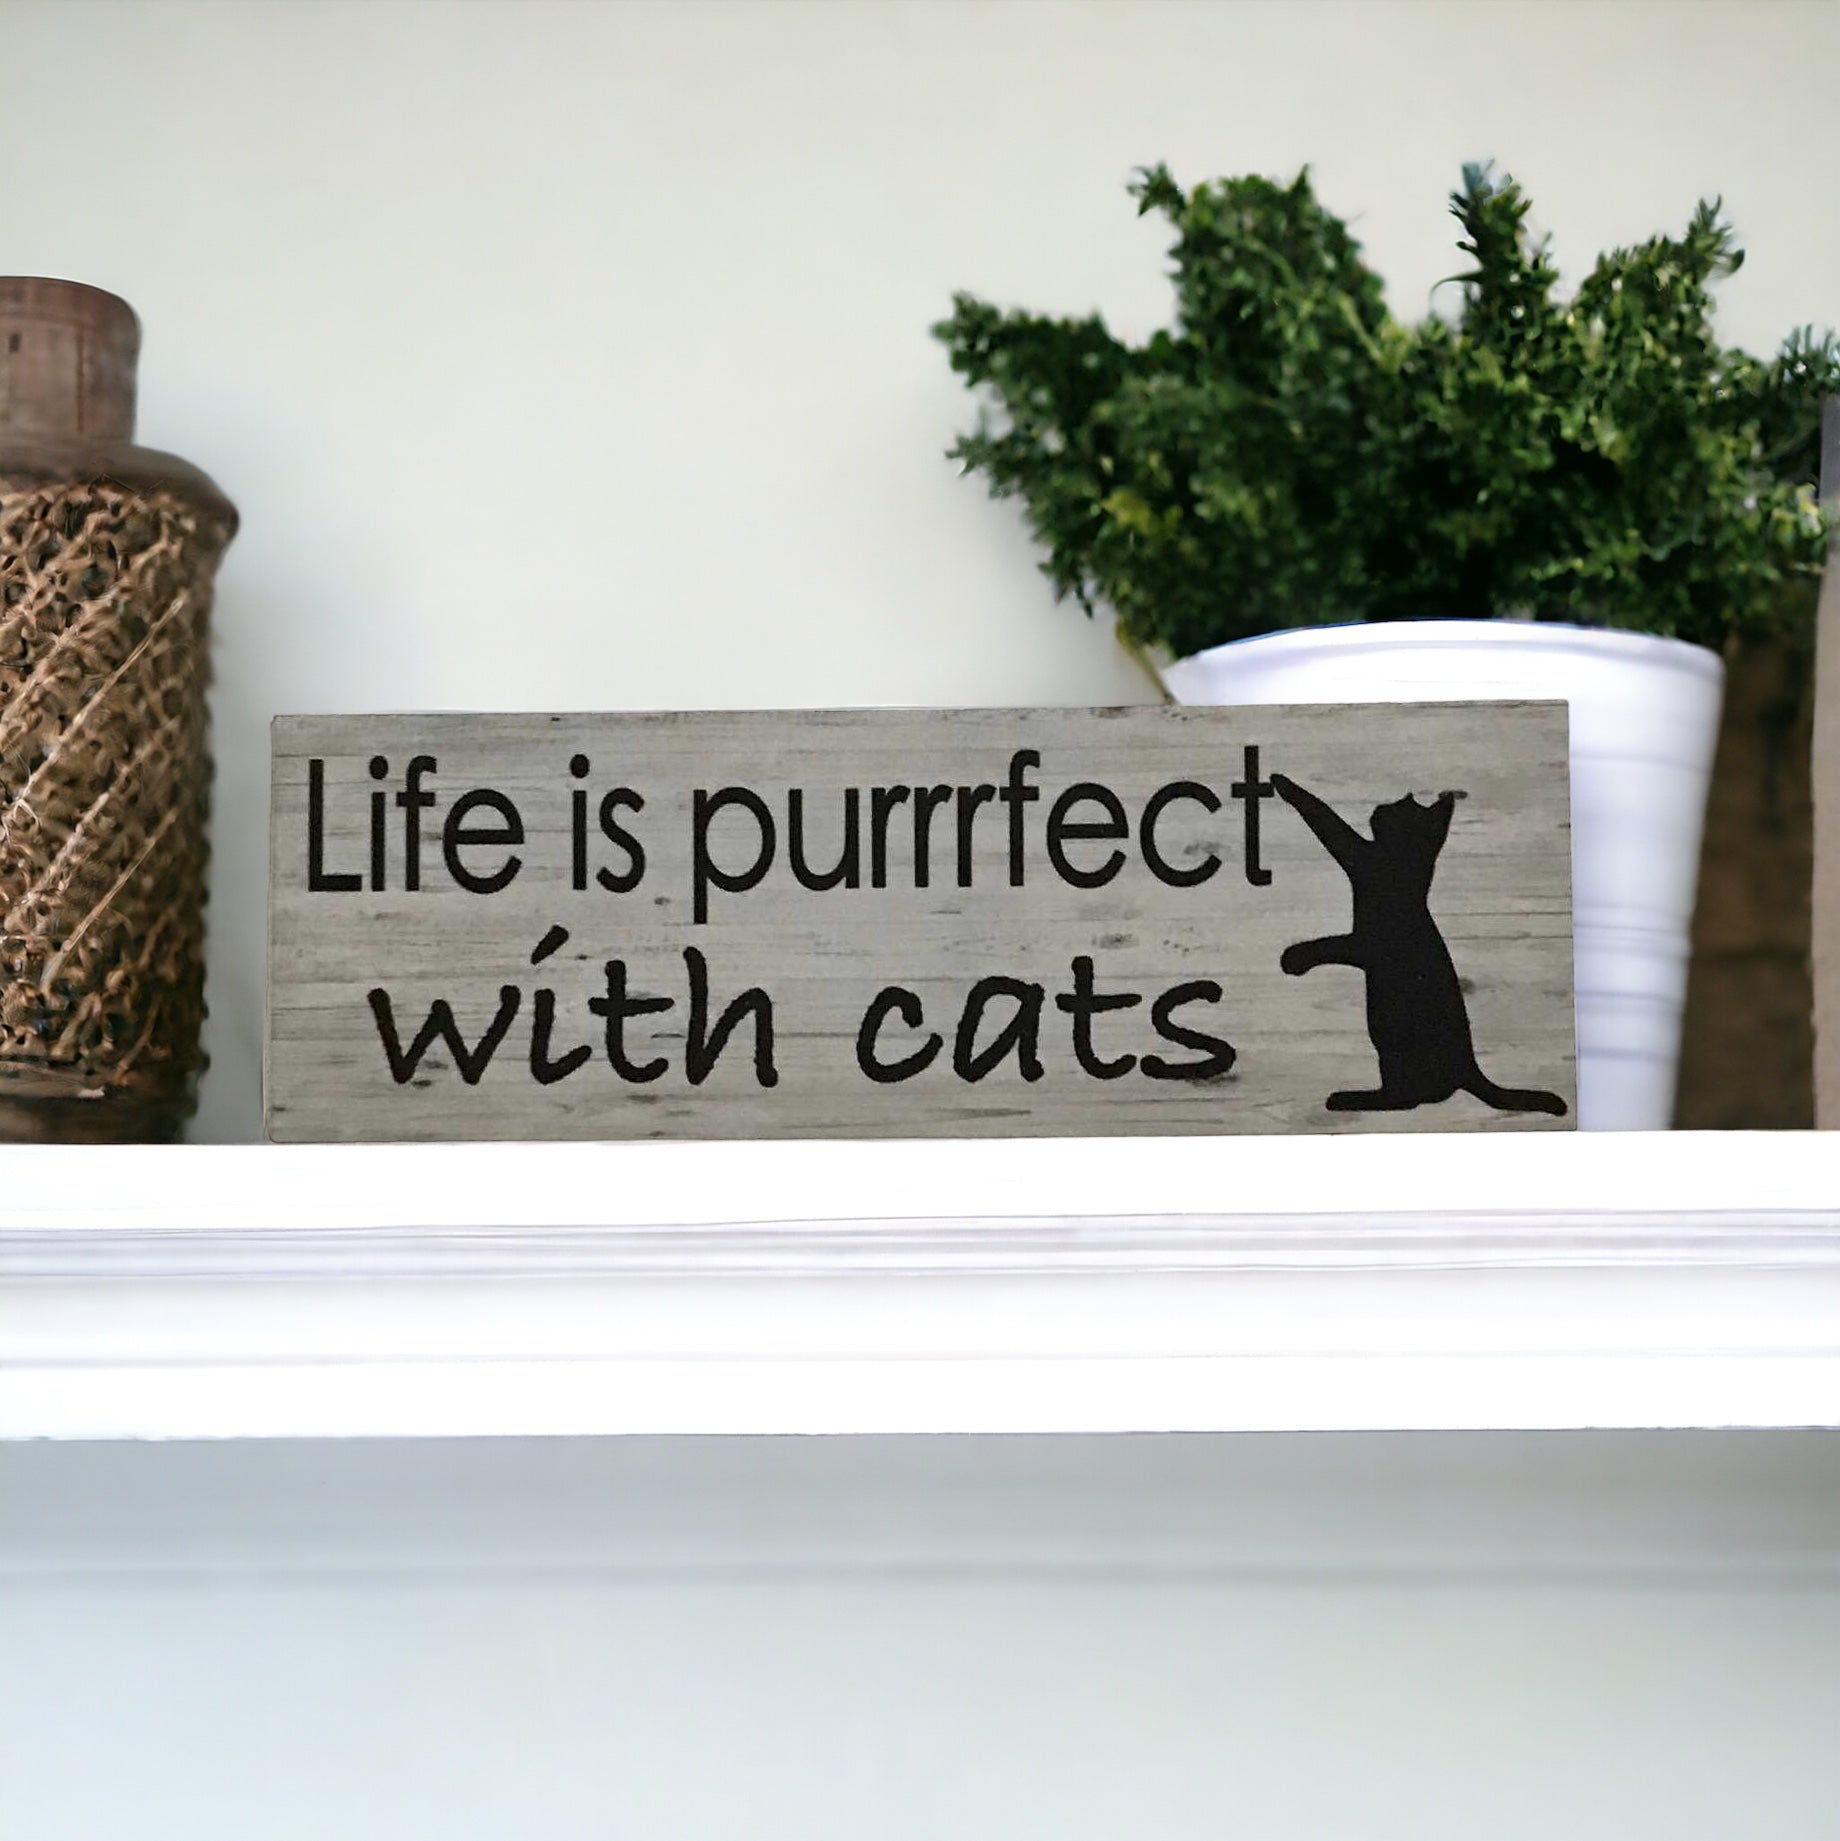 Life Perfect Purrrfect with Cats Cat Sign - The Renmy Store Homewares & Gifts 